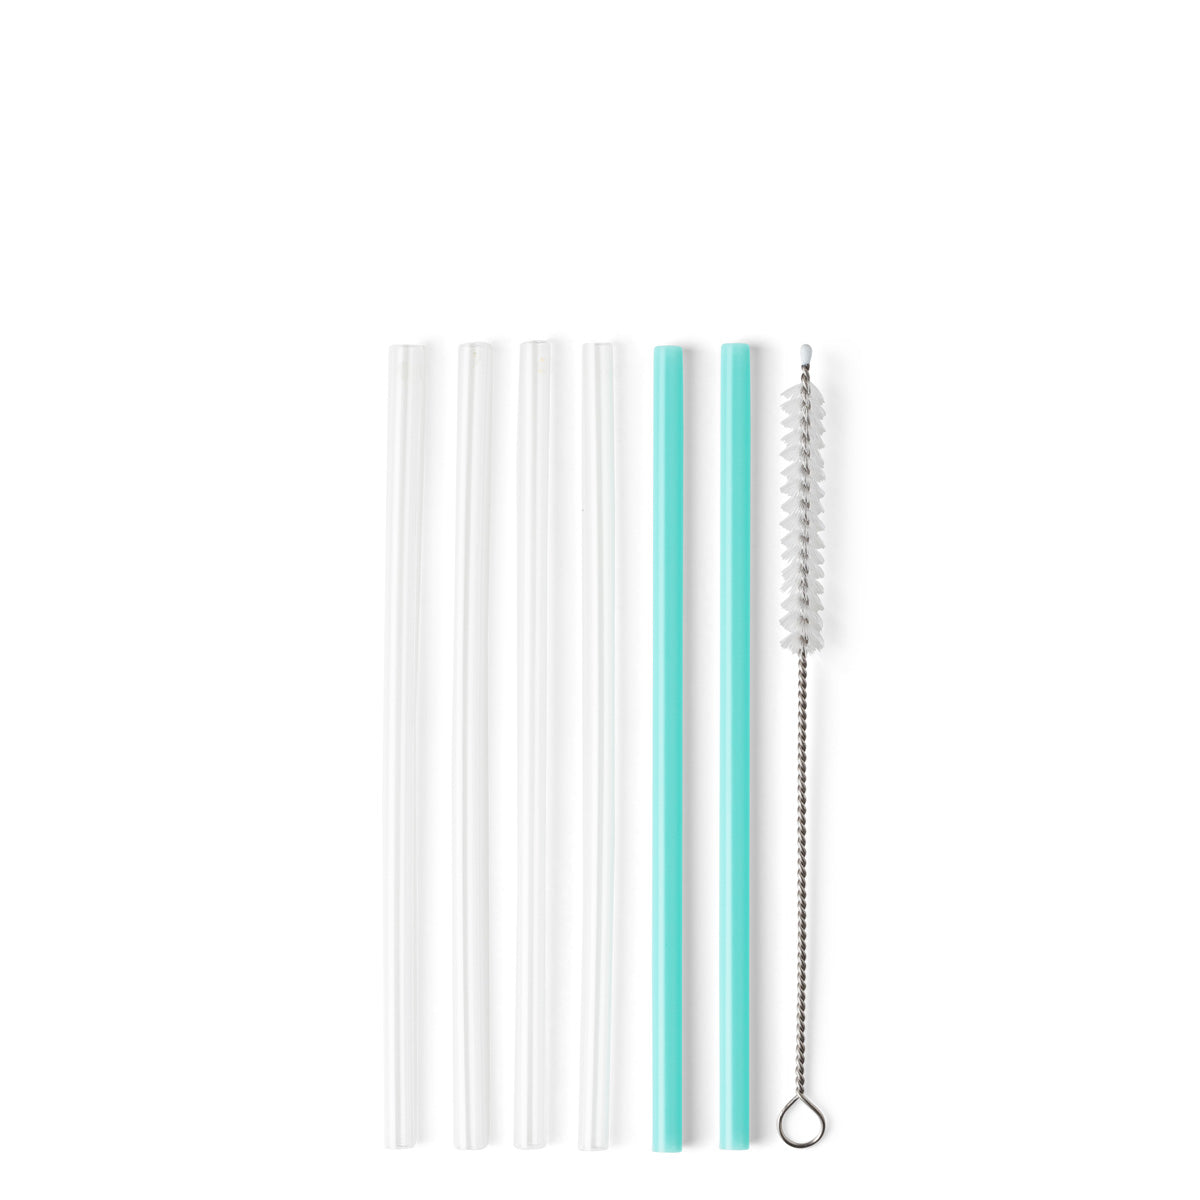 Load image into Gallery viewer, Clear + Aqua Reusable Straw Set (Short) by SWIG LIFE - The Street Boutique 
